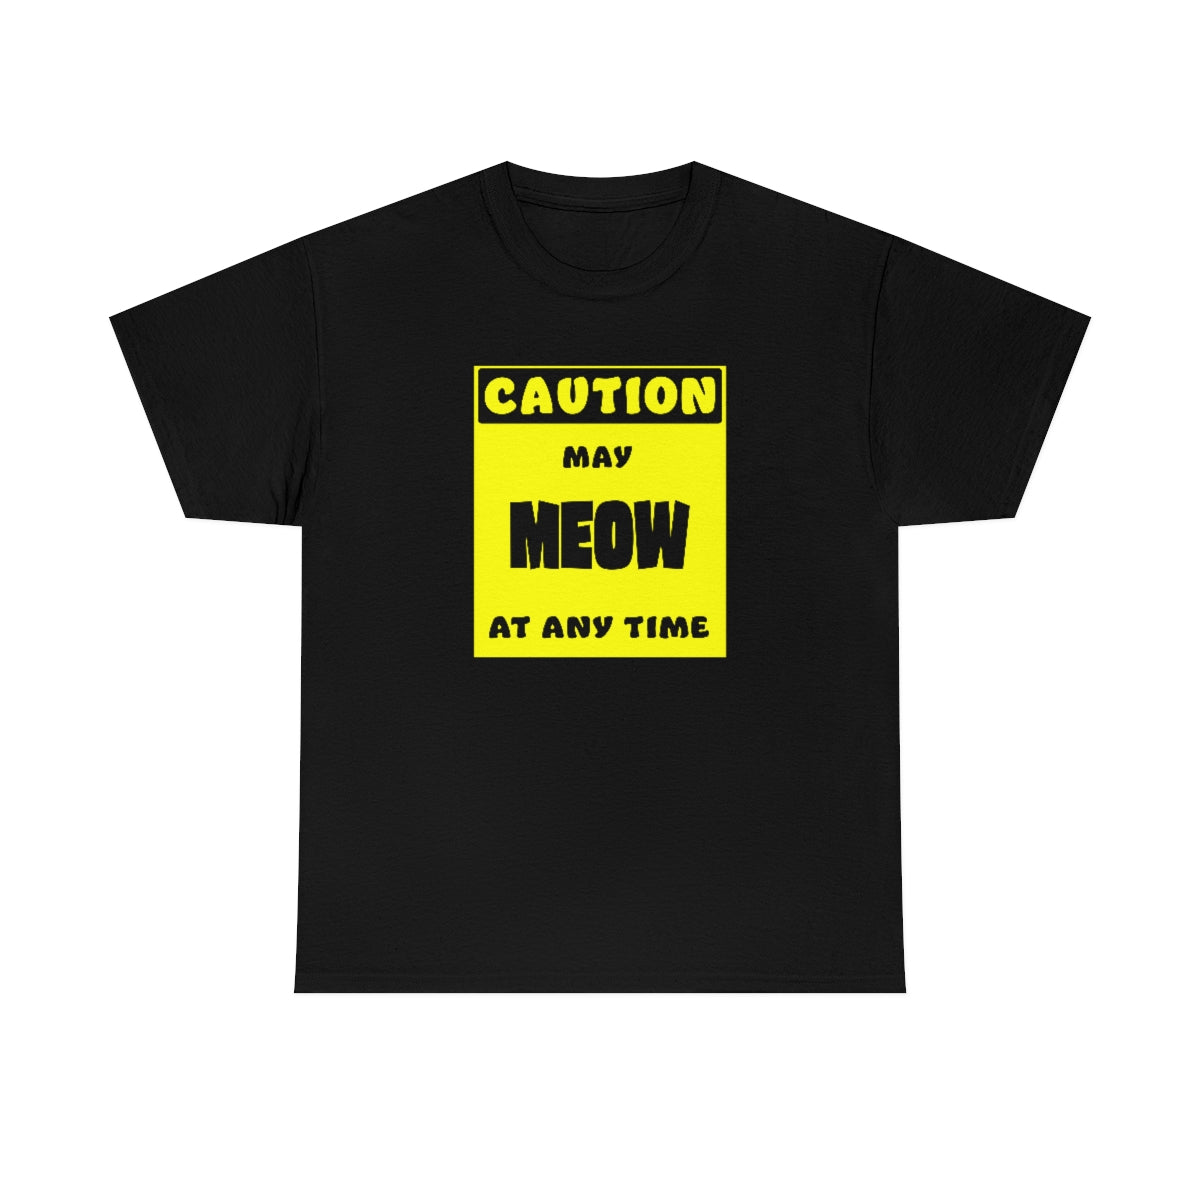 CAUTION! May MEOW at any time! - T-Shirt T-Shirt AFLT-Whootorca Black S 